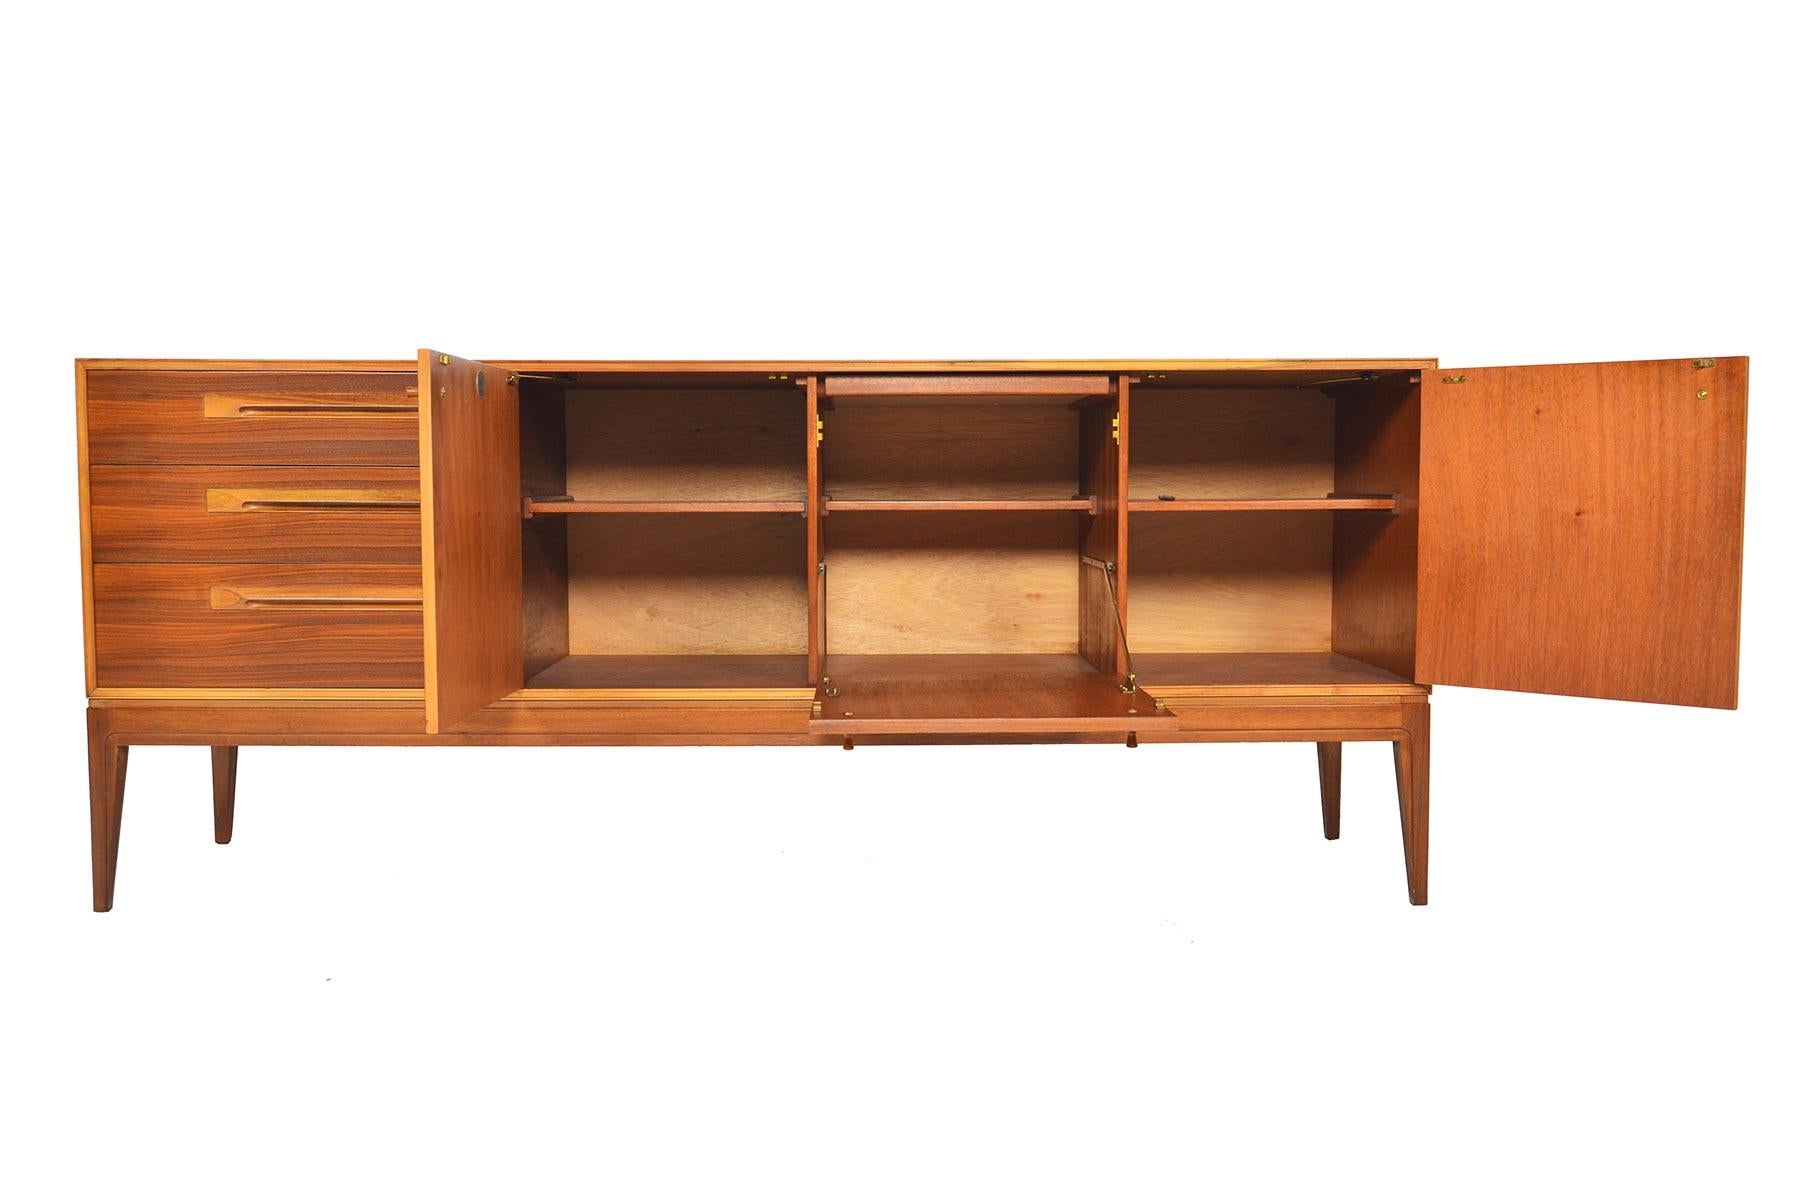 This stately midcentury credenza was crafted by A.H. McIntosh in the late 1960s. Beautiful, multi-tonal Tola wood lines the doors and case. A bank of three drawers sits to the left of three bays outfitted with fixed shelves. A center bay offers a